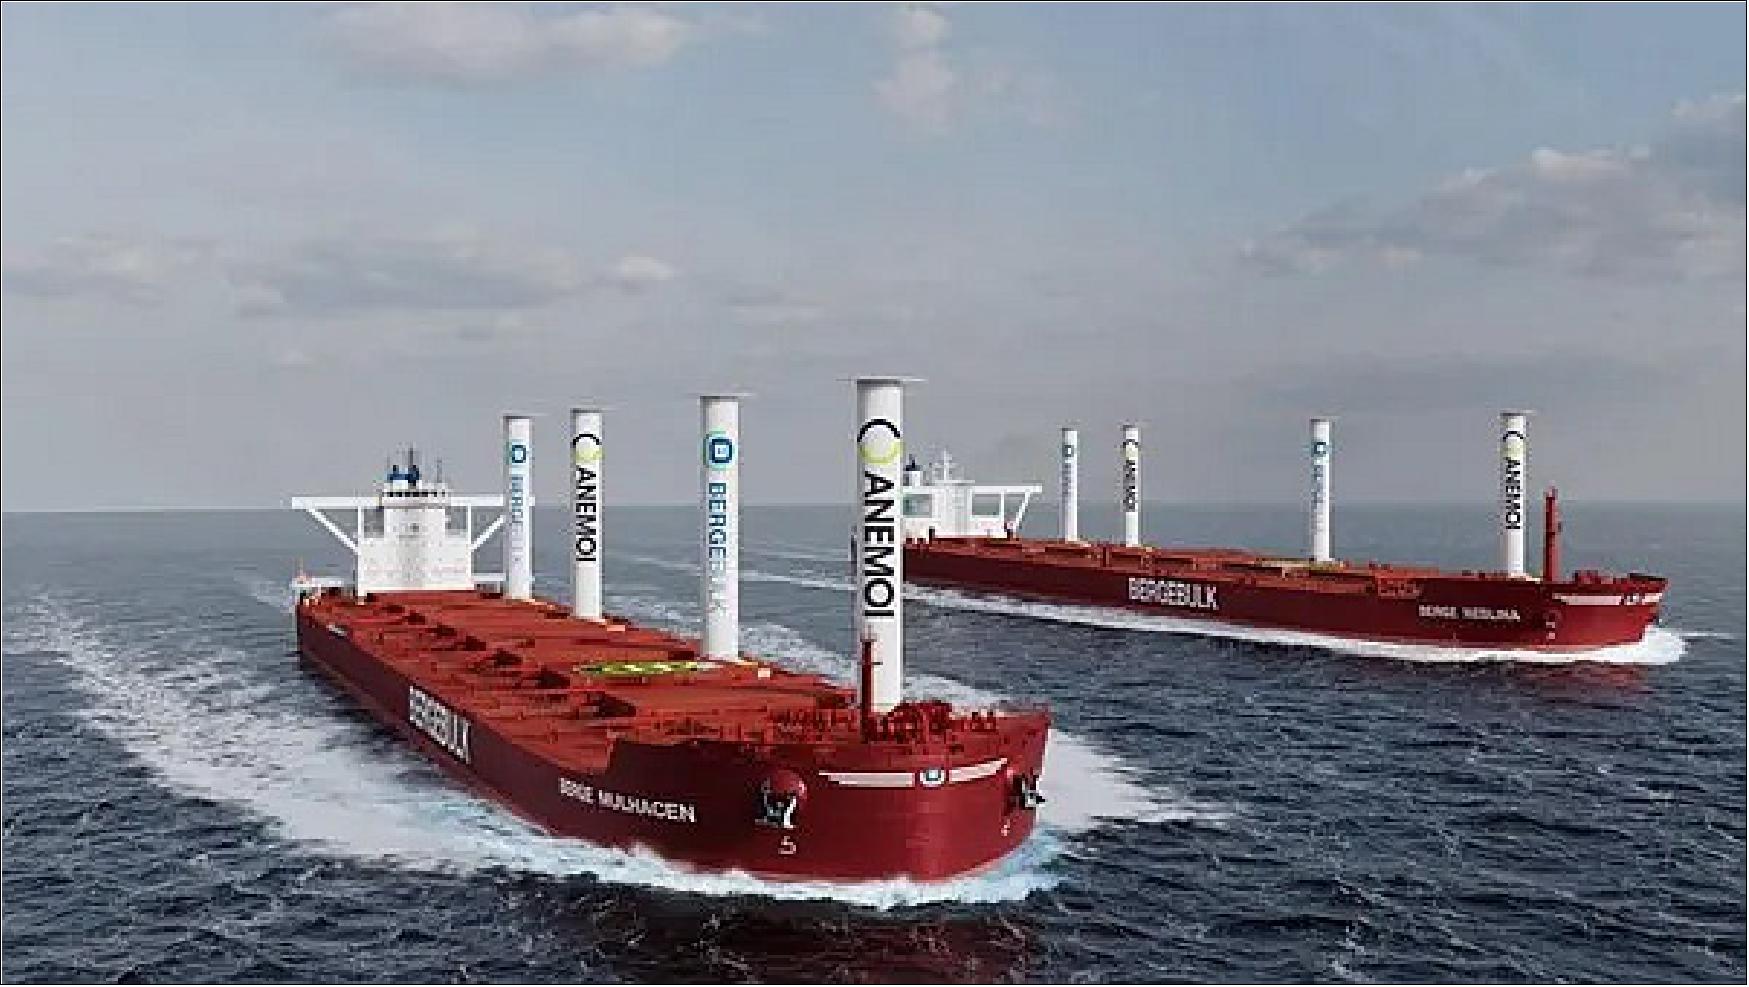 Figure 6: Singapore-based dry bulk owner Berge Bulk has signed agreements with Anemoi Marine Technologies to supply and fit two vessels in its dry bulk fleet with Anemoi Rotor Sails (image credit: Berge Bulk)